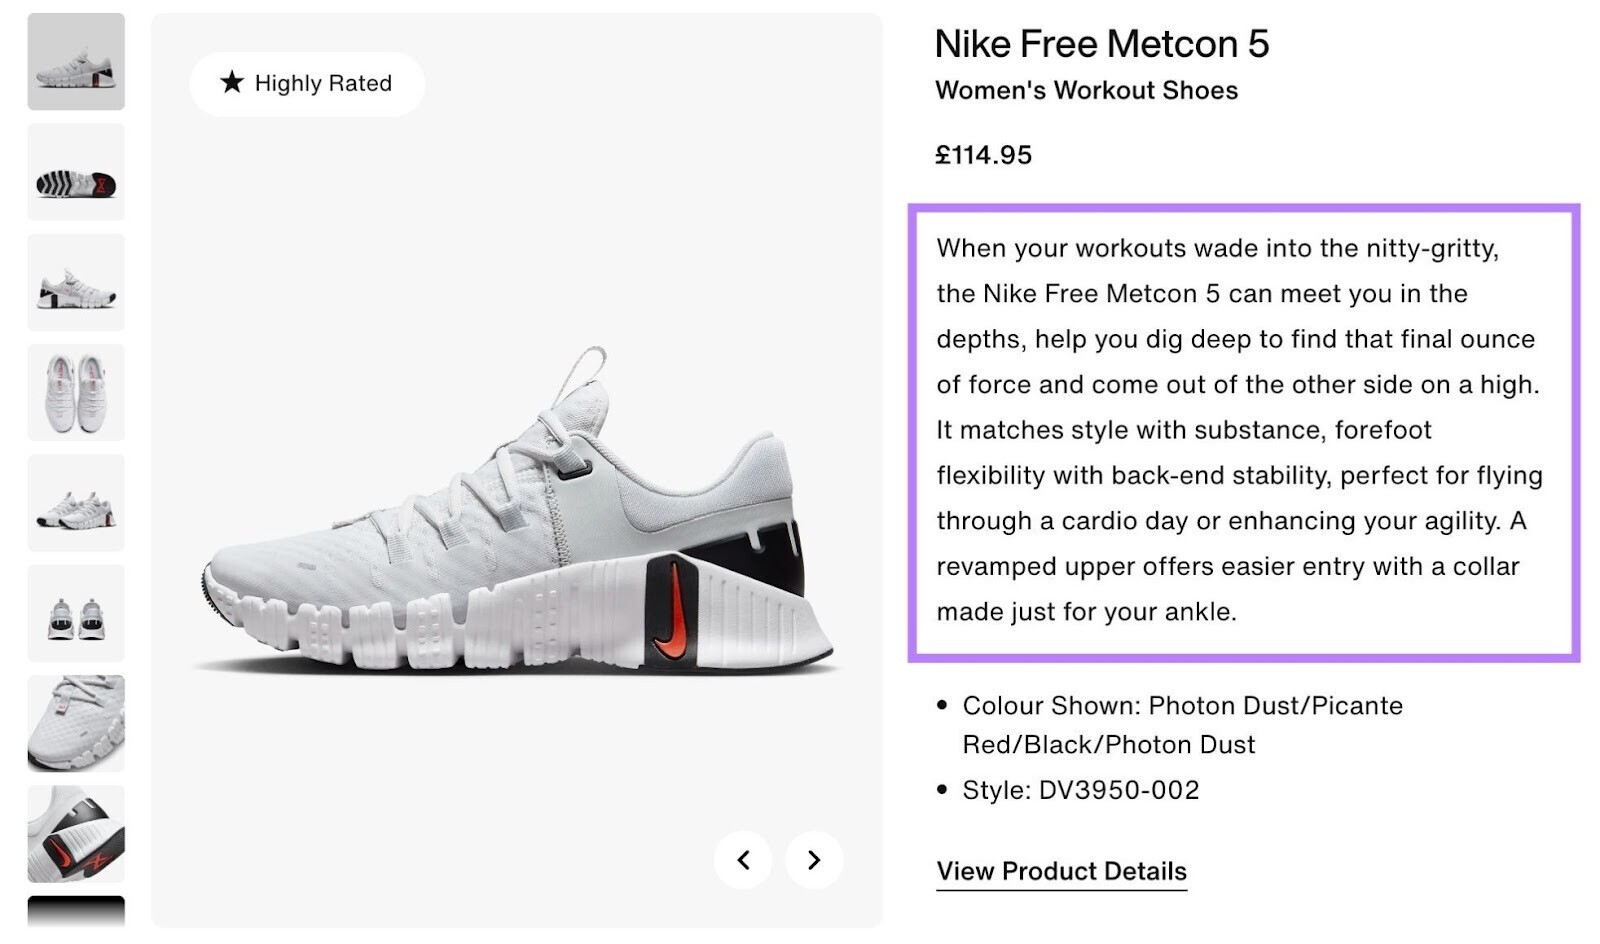 Product description for trainers, which begins: "When your workouts wade into the nitty-gritty, the Nike Free Metcon 5 can meet you in the depths..."